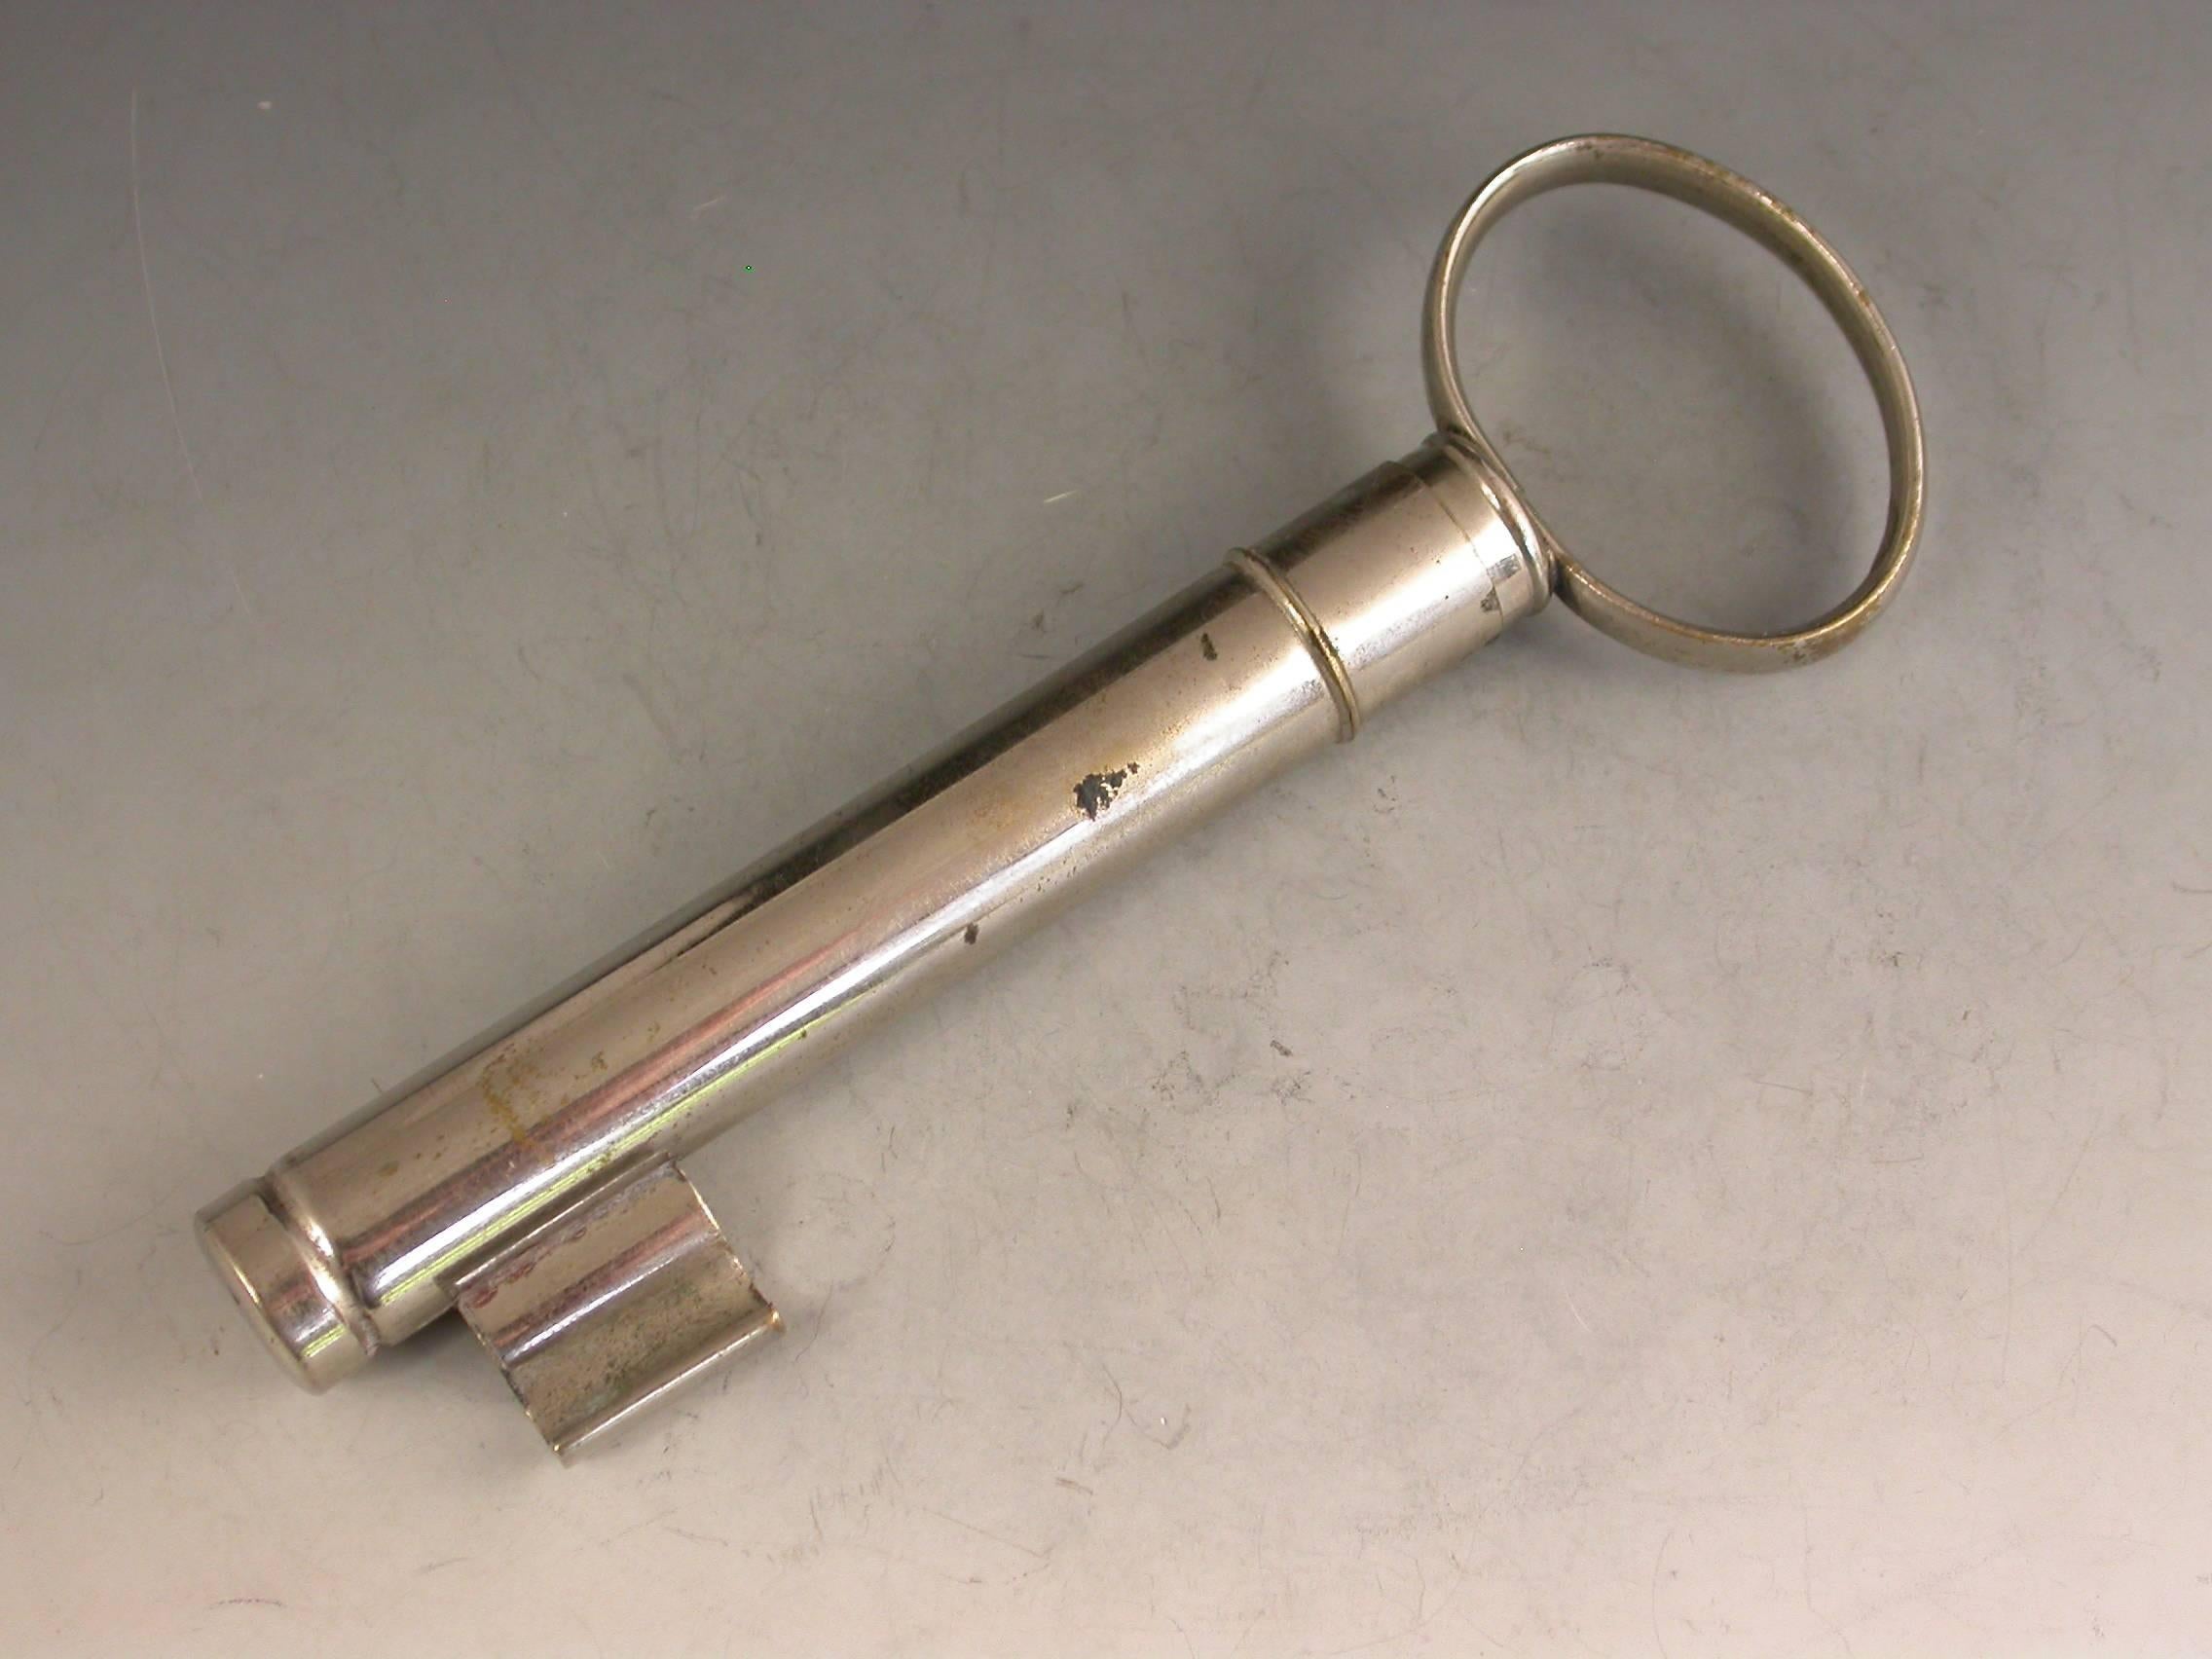 Other Early 20th Century Novelty Silver Plated Key Writing Compendium, circa 1900